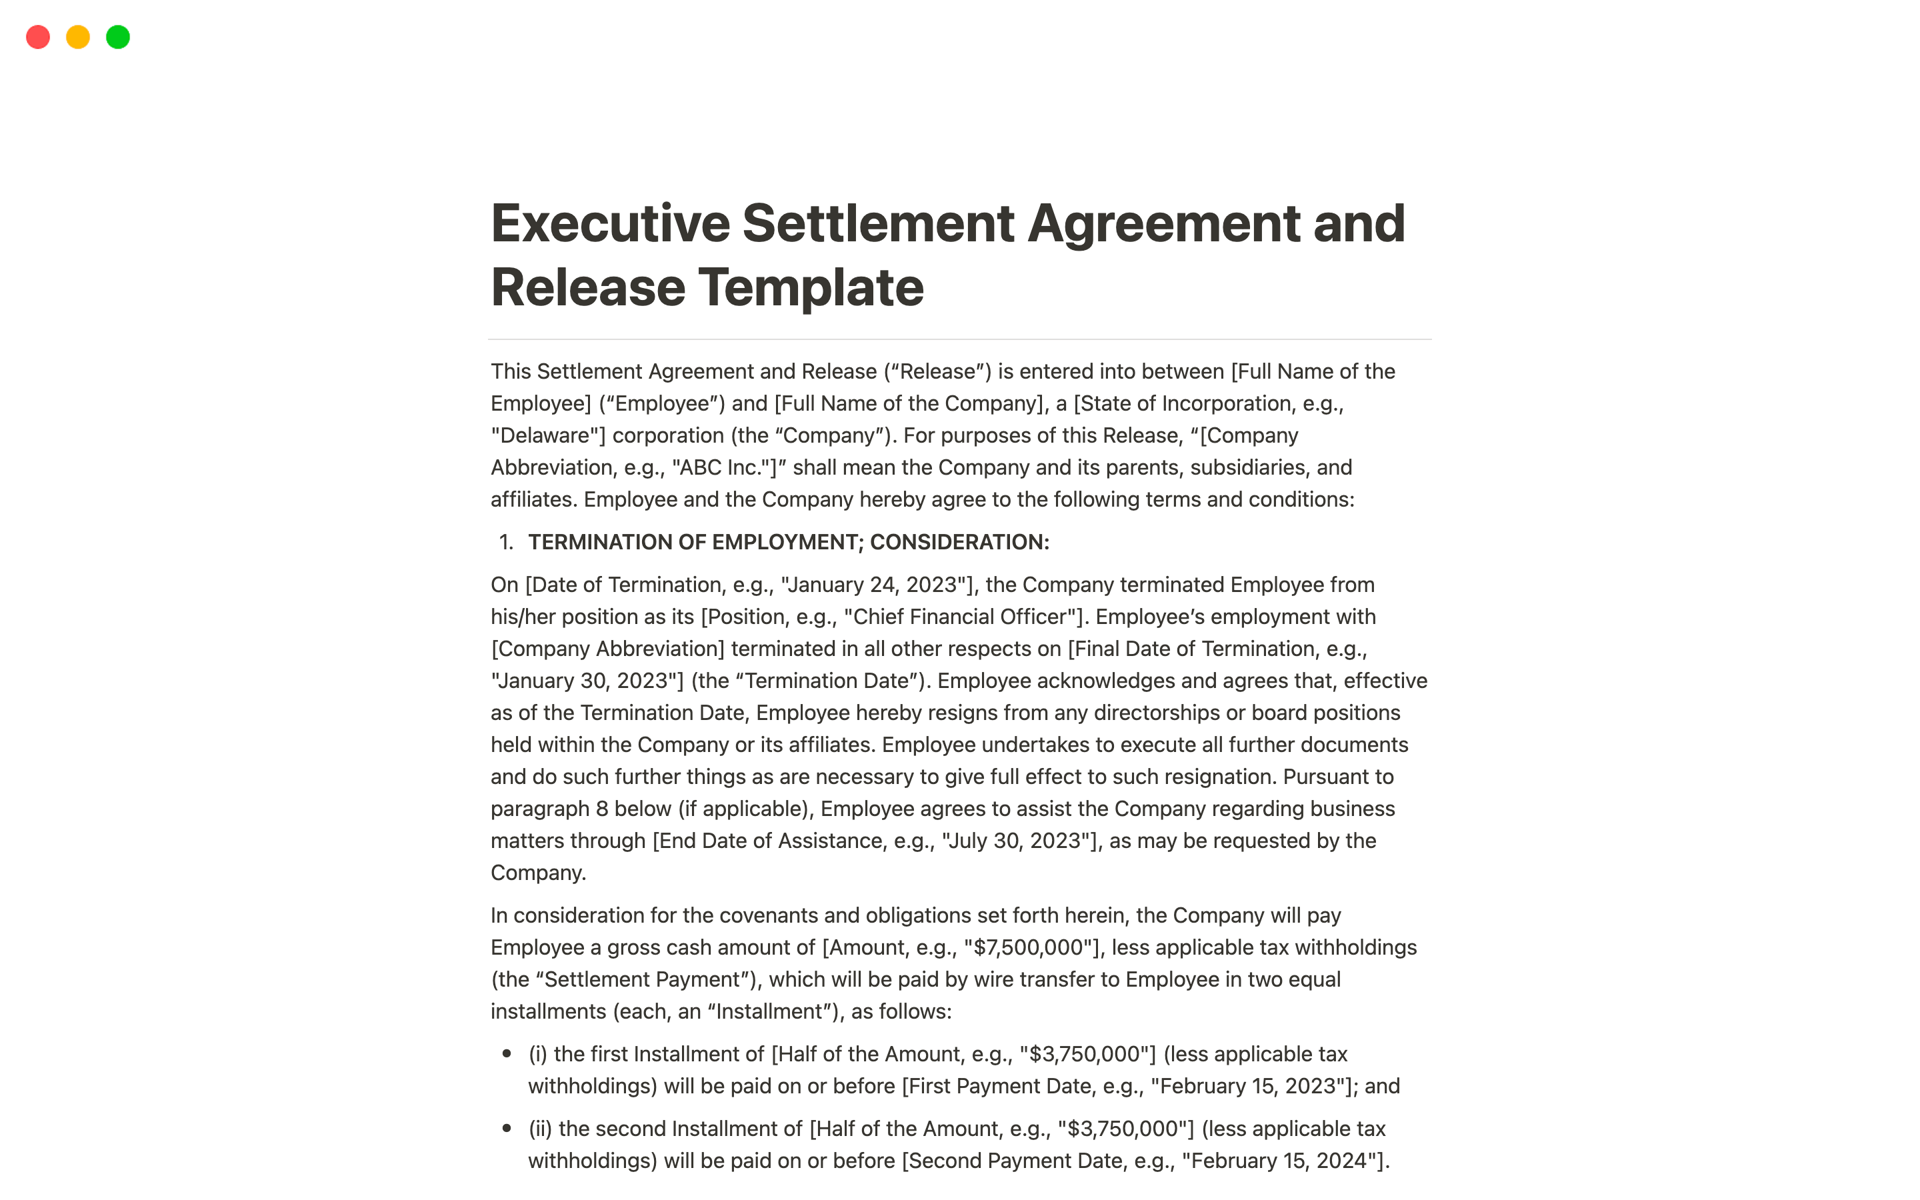 A template preview for Executive Settlement Agreement and Release